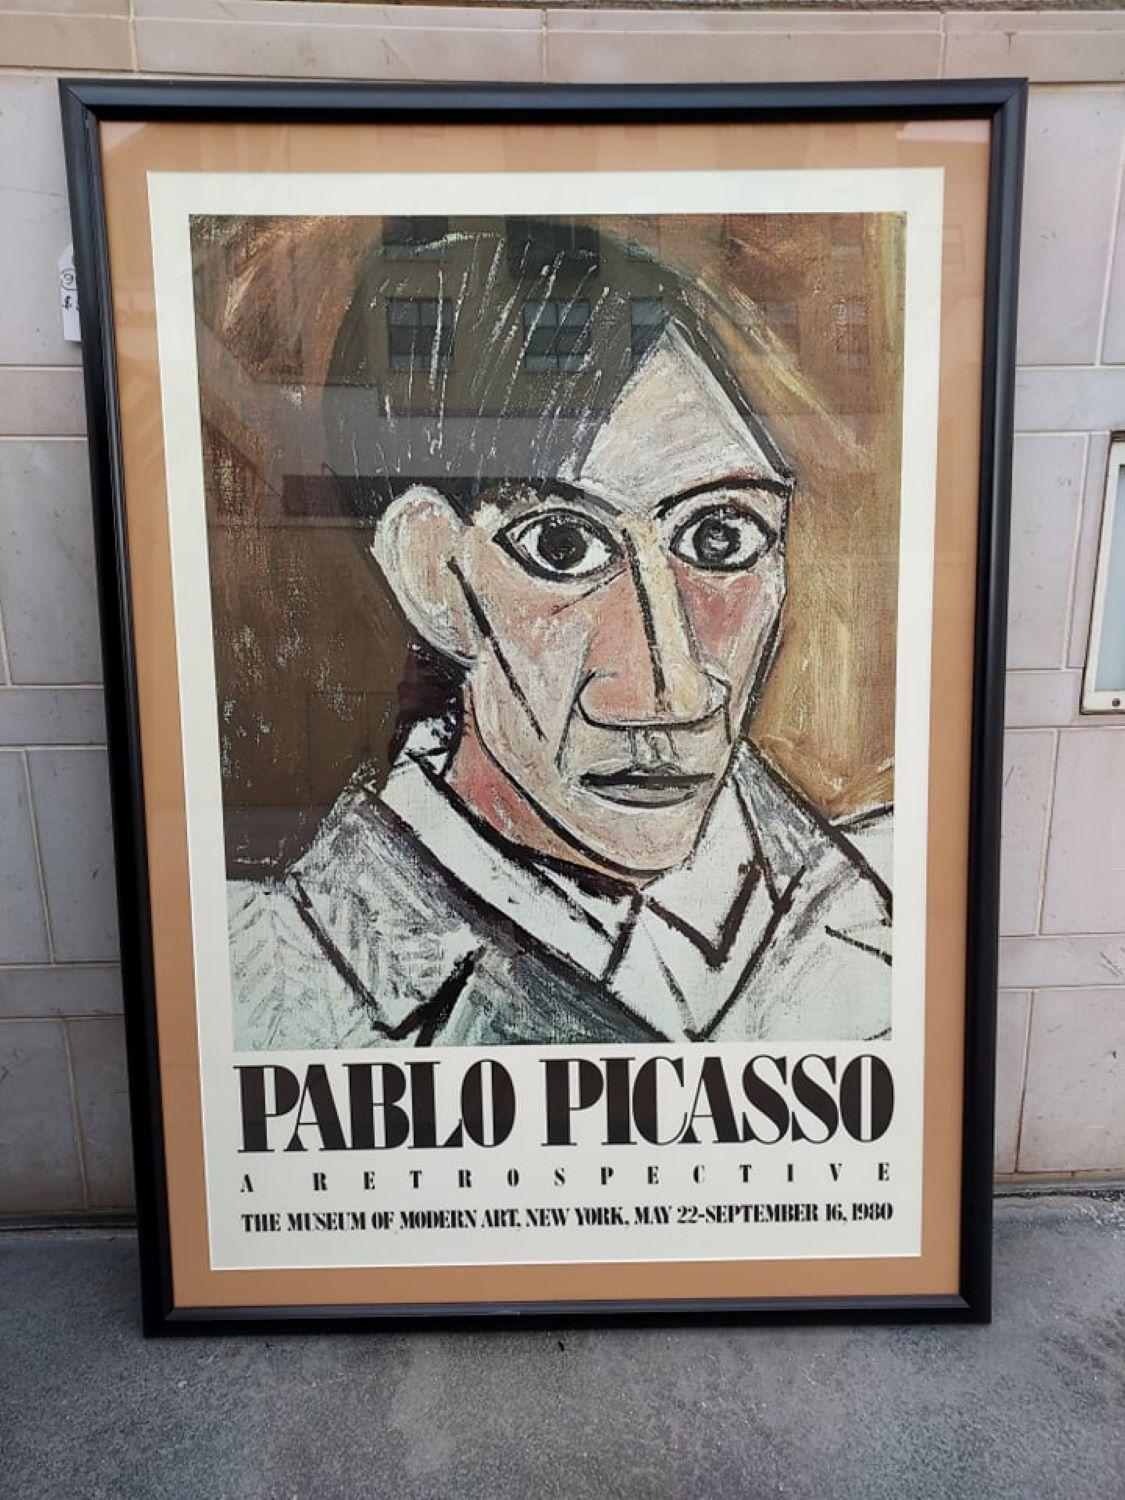 Picasso    Exhibition Museum Of Modern Art New York  - Cubist Print by Pablo Picasso